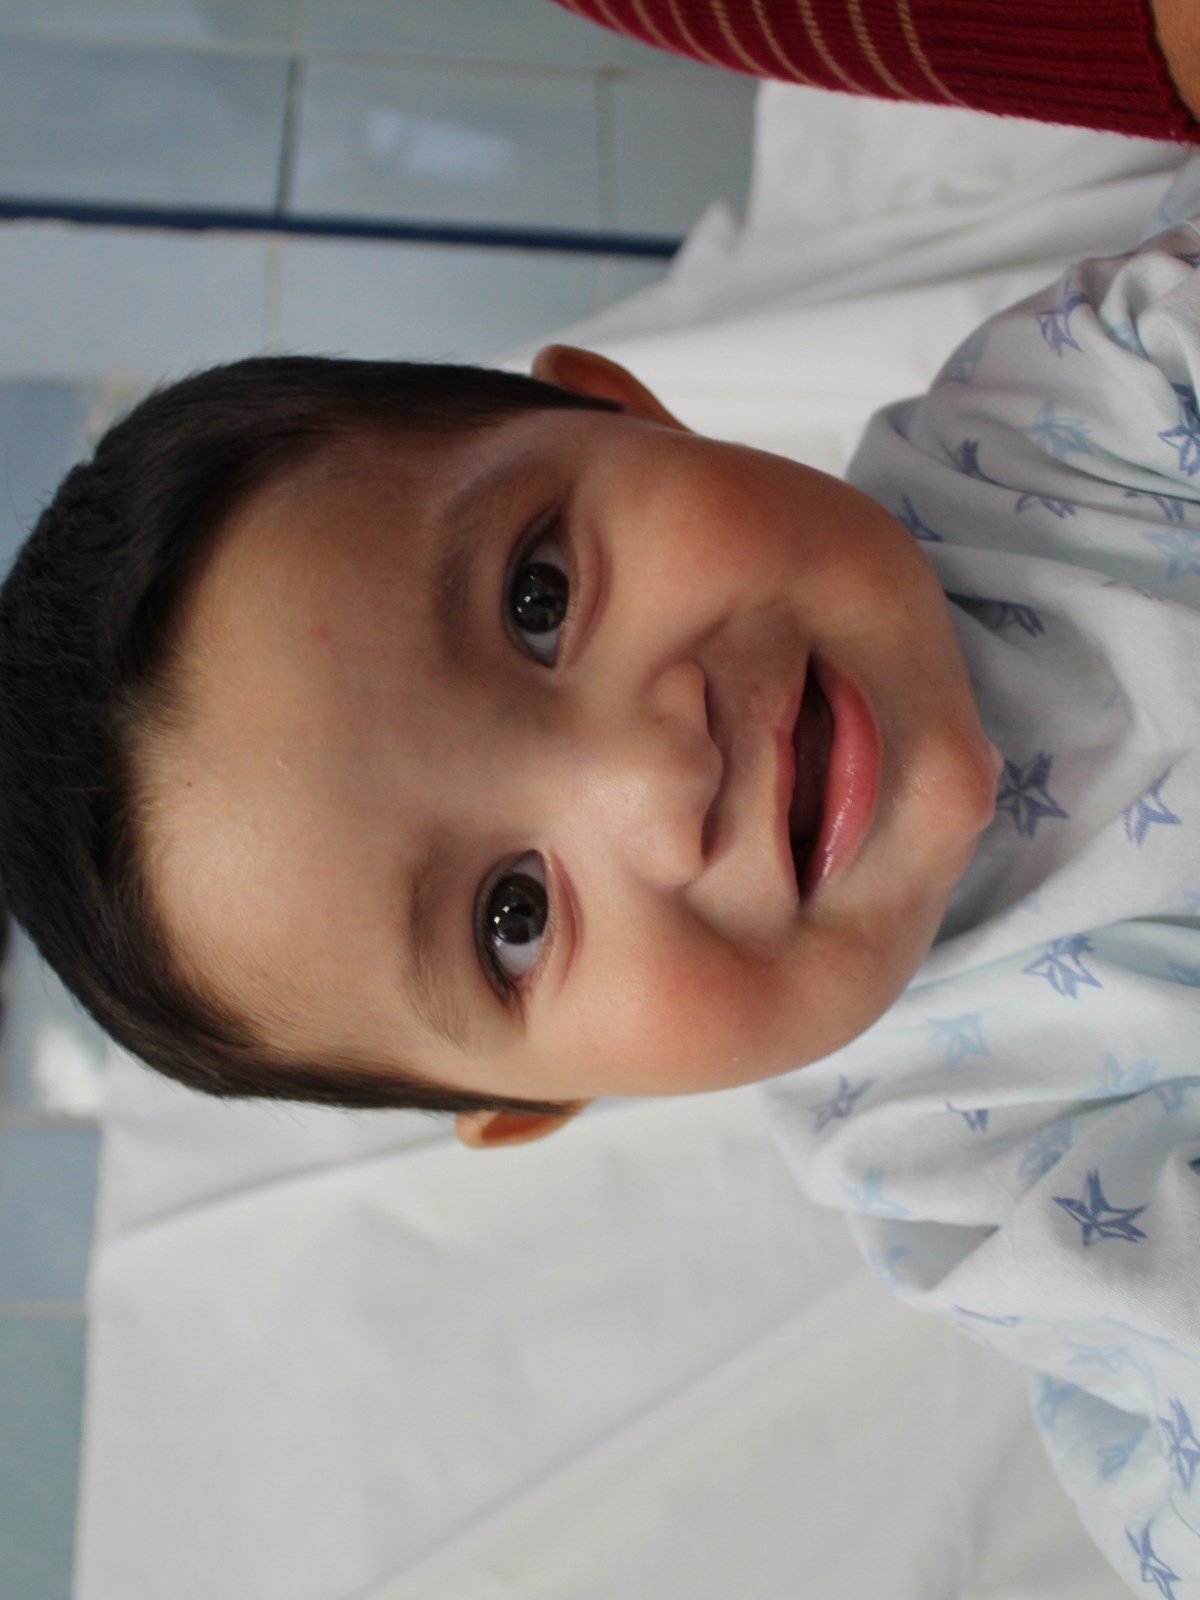 Gael smiling after cleft surgery